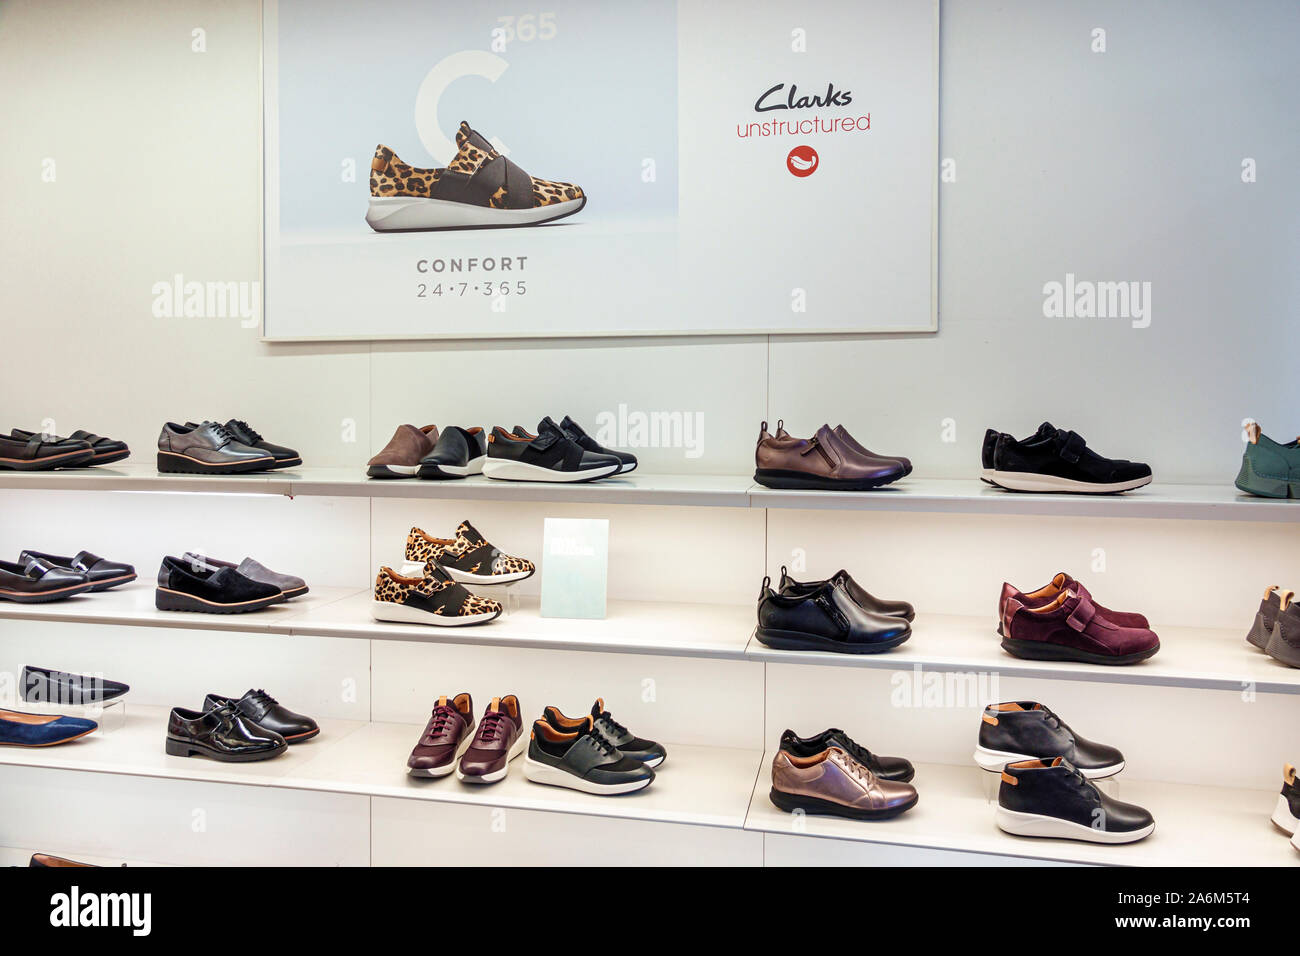 the clarks shoe store